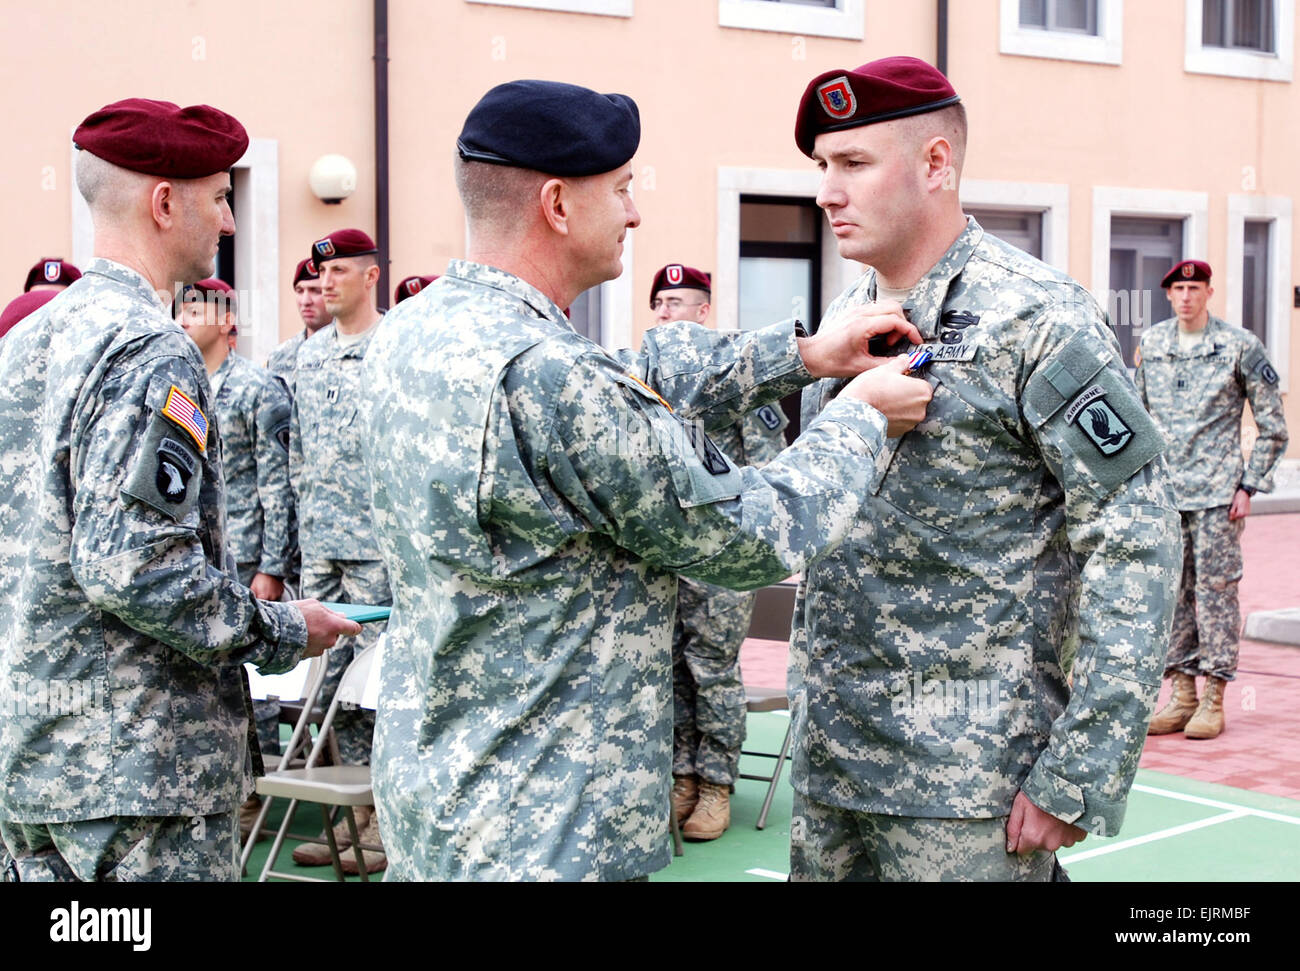 Brig. Gen. William, B. Garrett, Southern European Task Force commander,  presents Spc. Dillon Bergstad of Headquarters and Headquarters Company, 1st Battalion Airborne, 503rd Infantry Regiment with the Silver Star on Caserma Ederle in Vicenza, Italy, Oct. 31. Bergstad received the medal for his actions in combat while deployed to Afghanistan in August 2007.   Sgt. 1st Class Jacob Caldwell Stock Photo